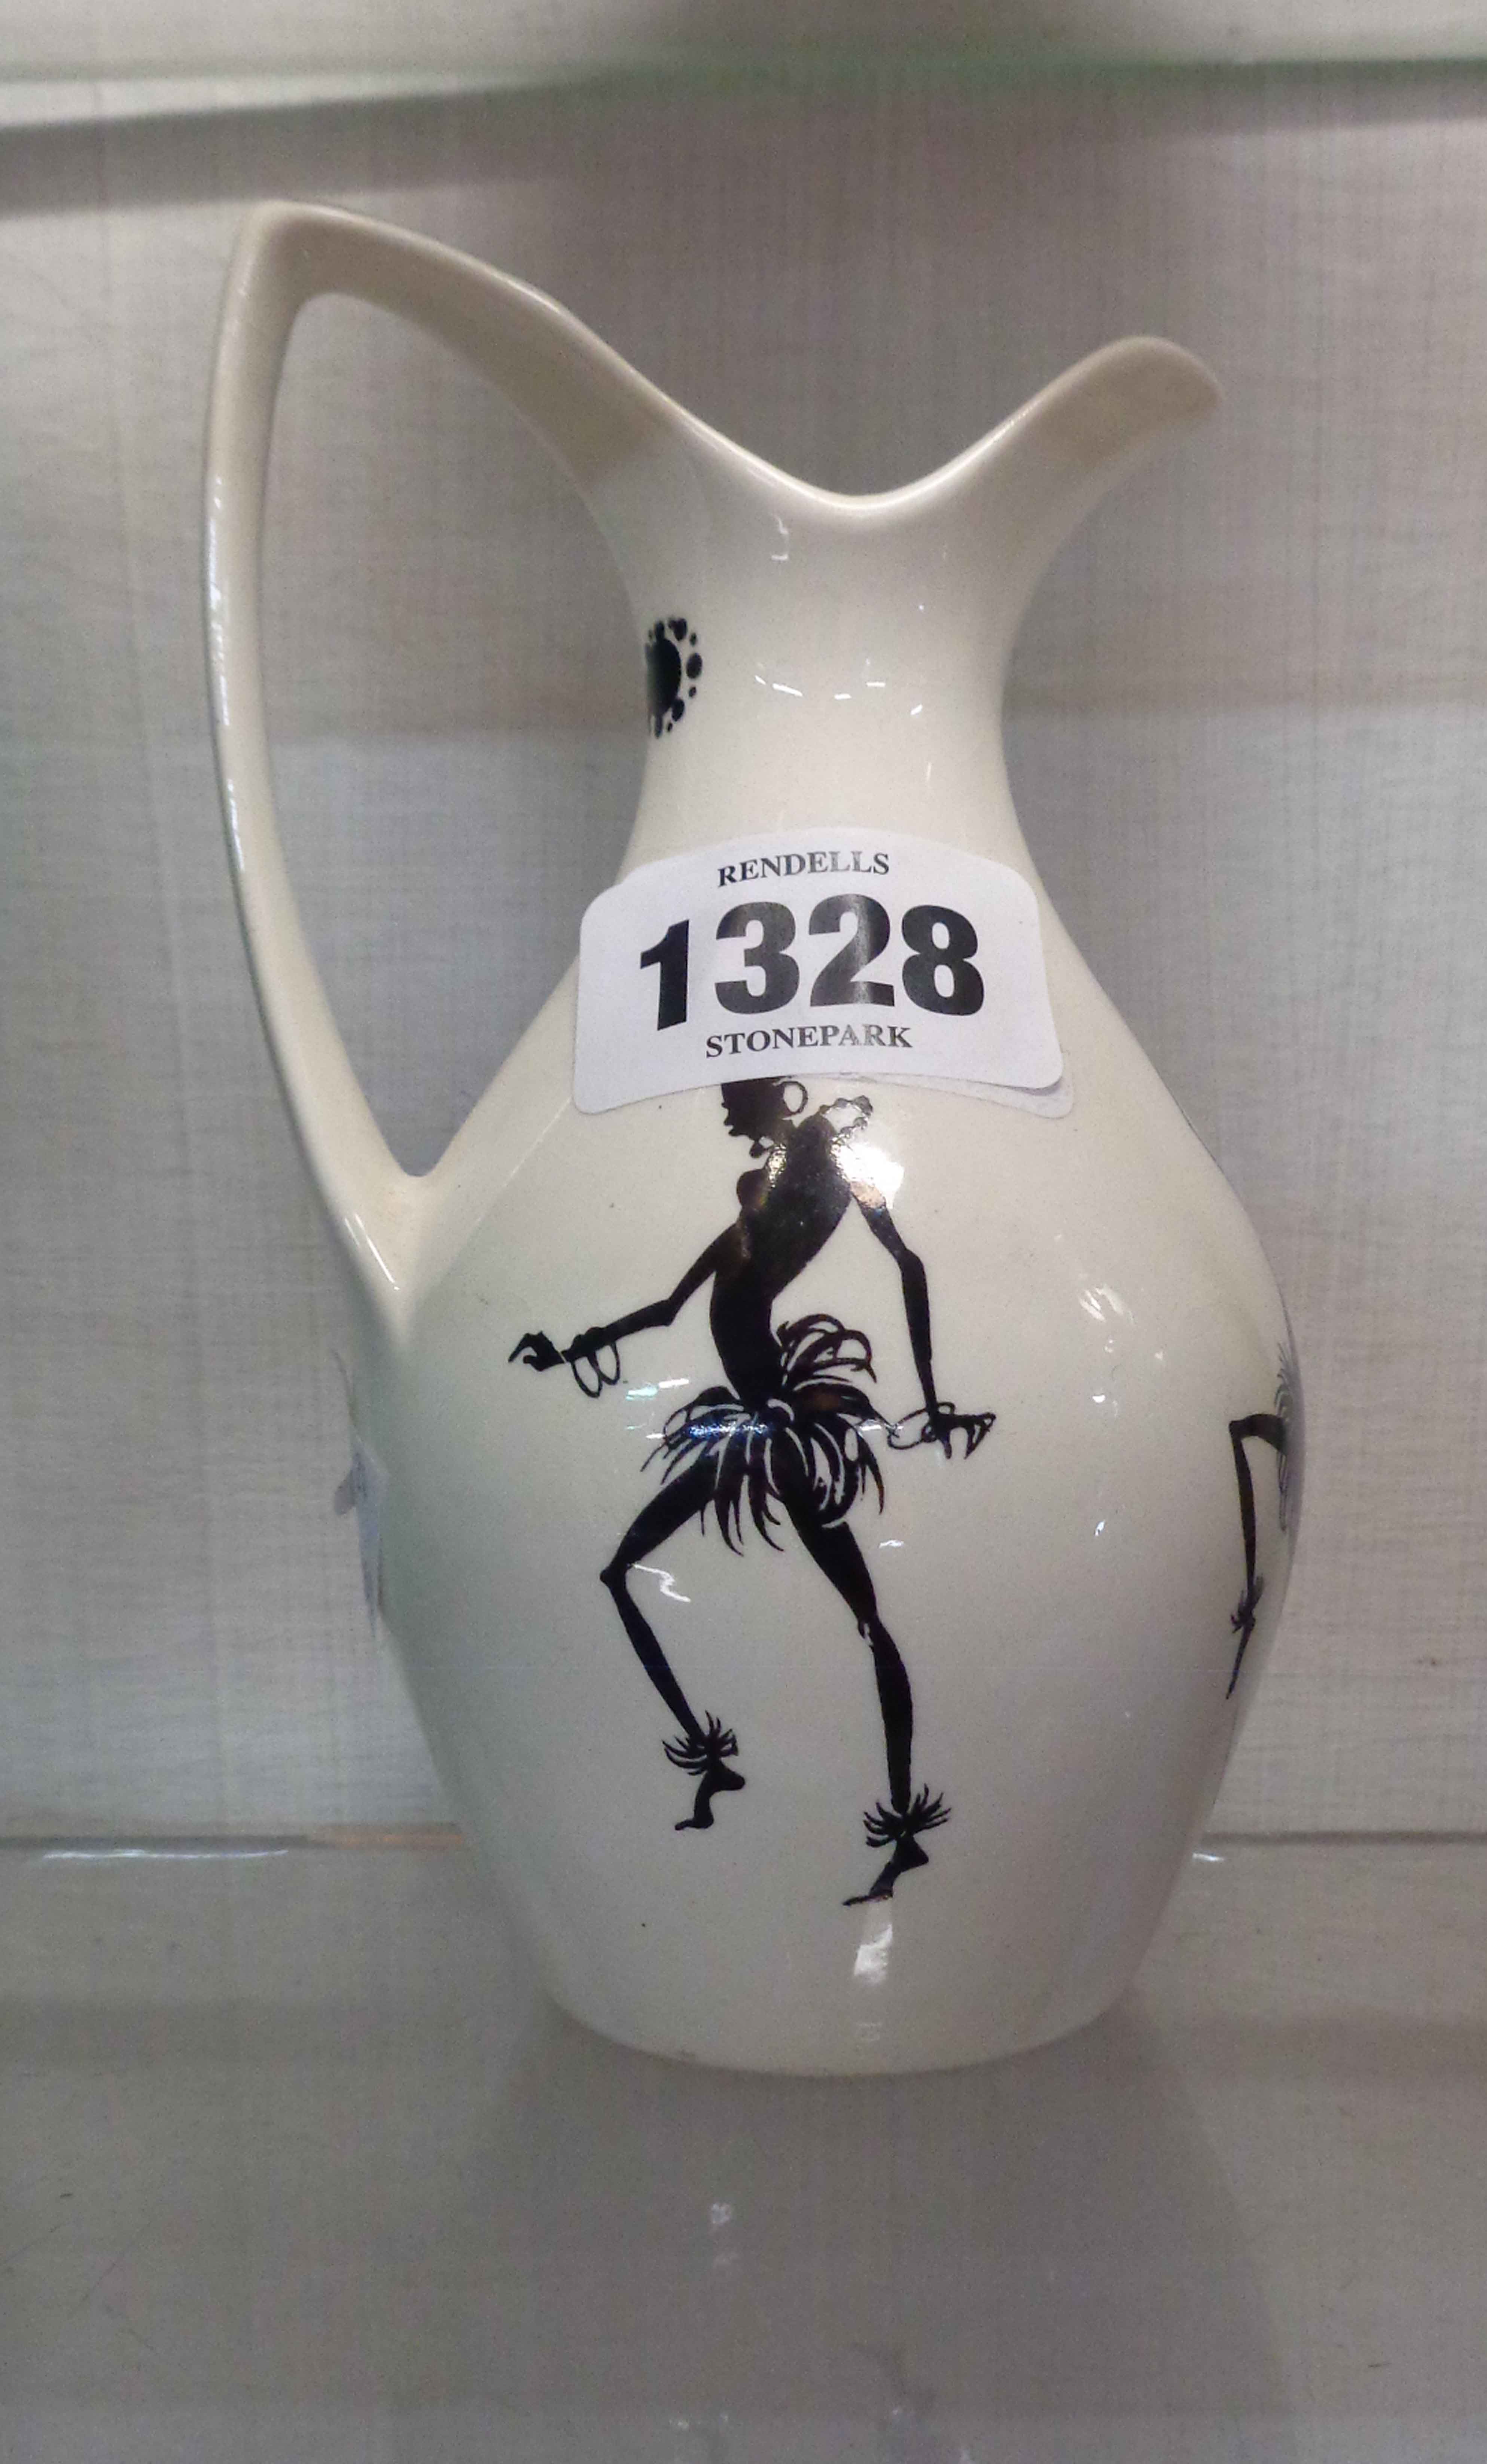 A vintage Wade pottery jug decorated in the Zamba pattern